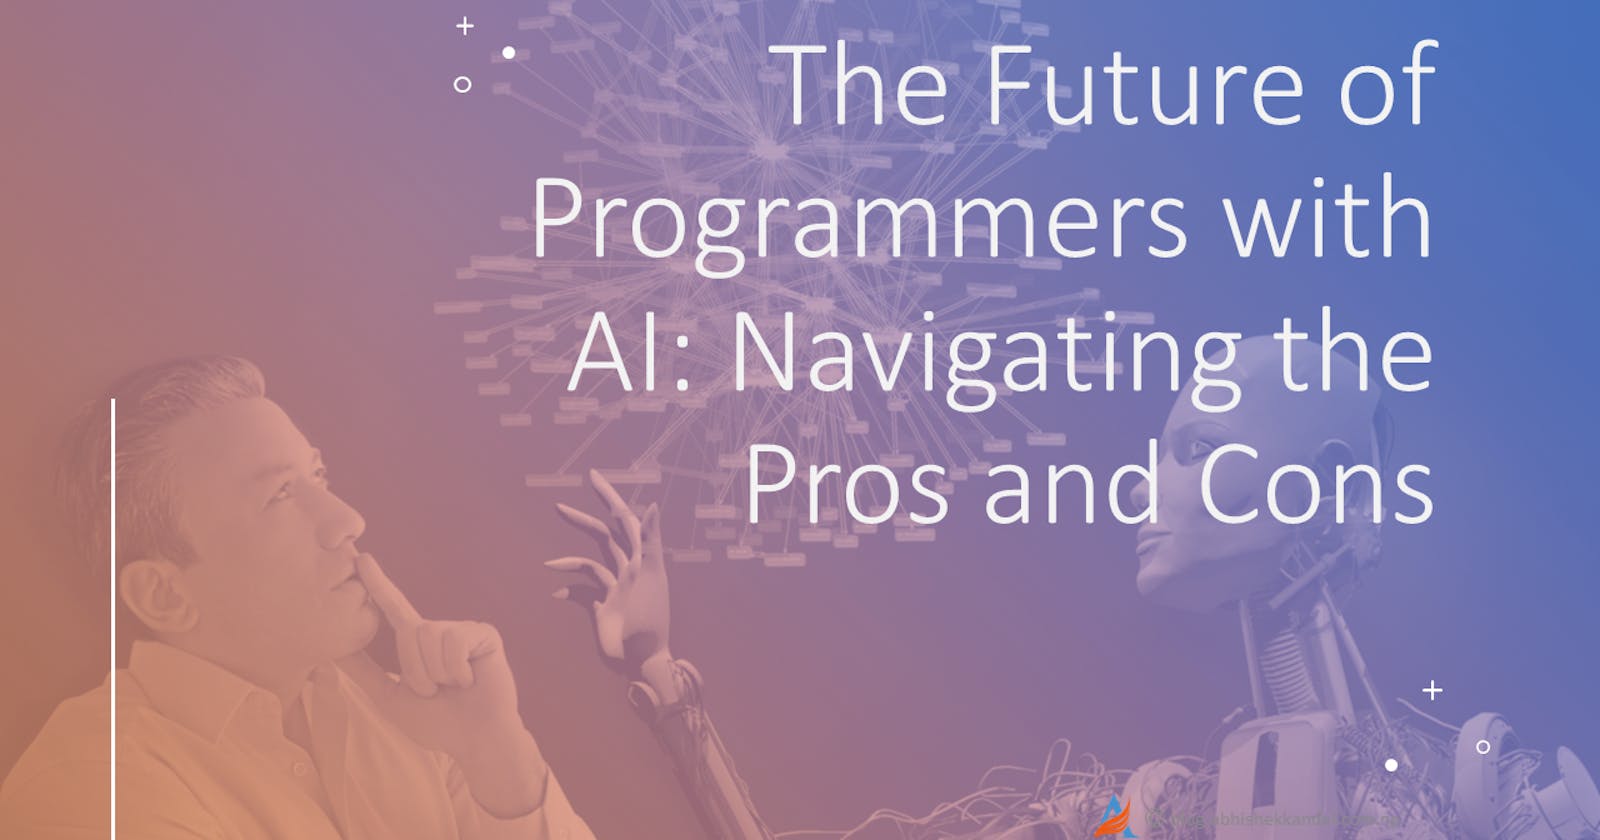 The Future of Programmers with AI: Navigating the Pros and Cons